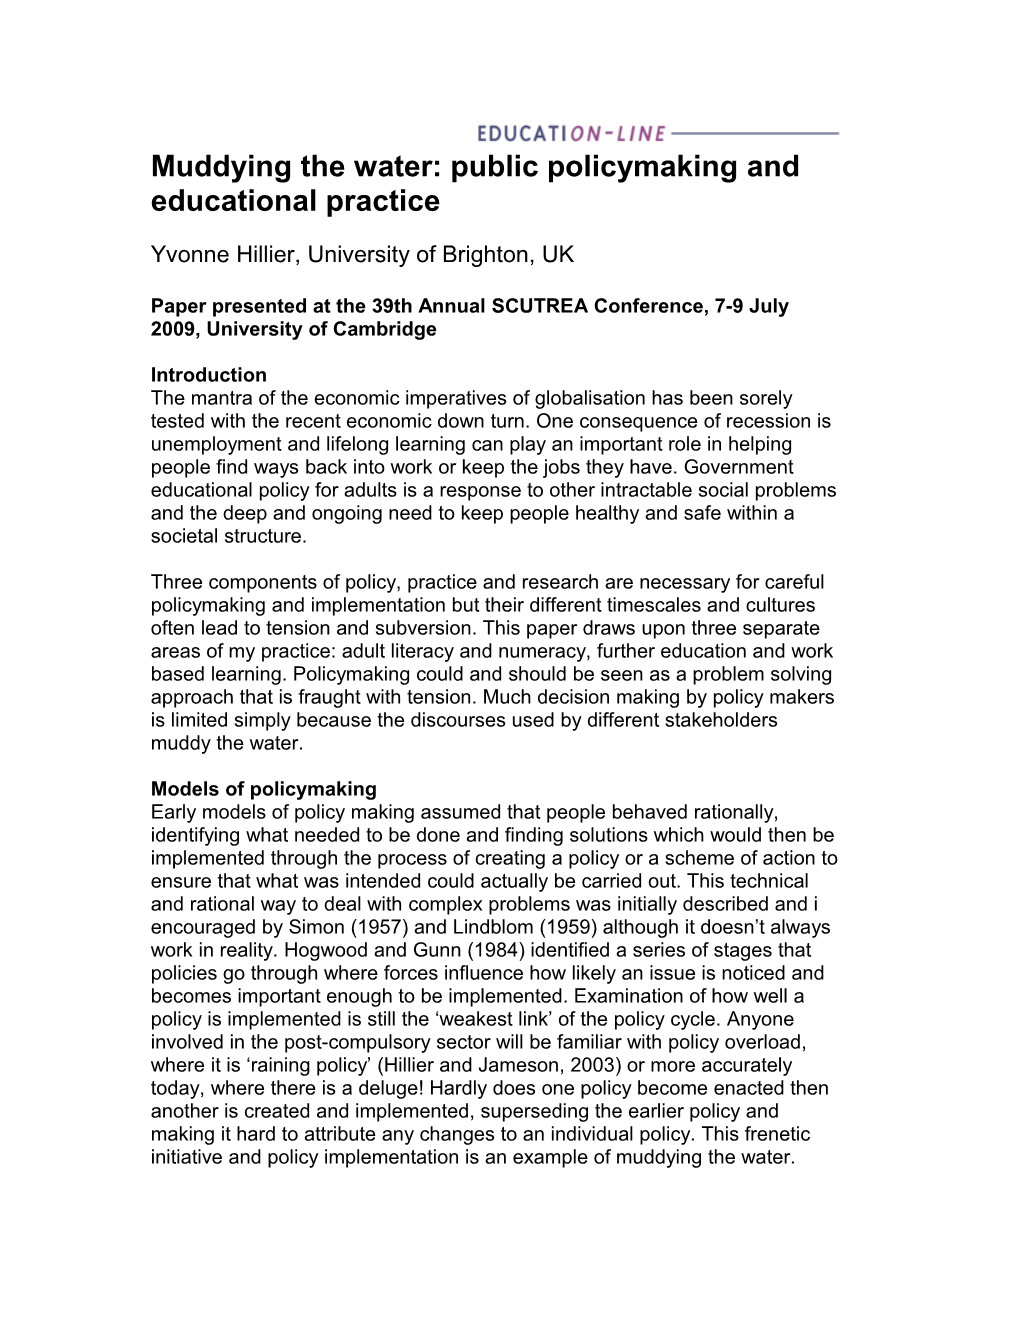 Muddying the Water: Public Policymaking and Educational Practice